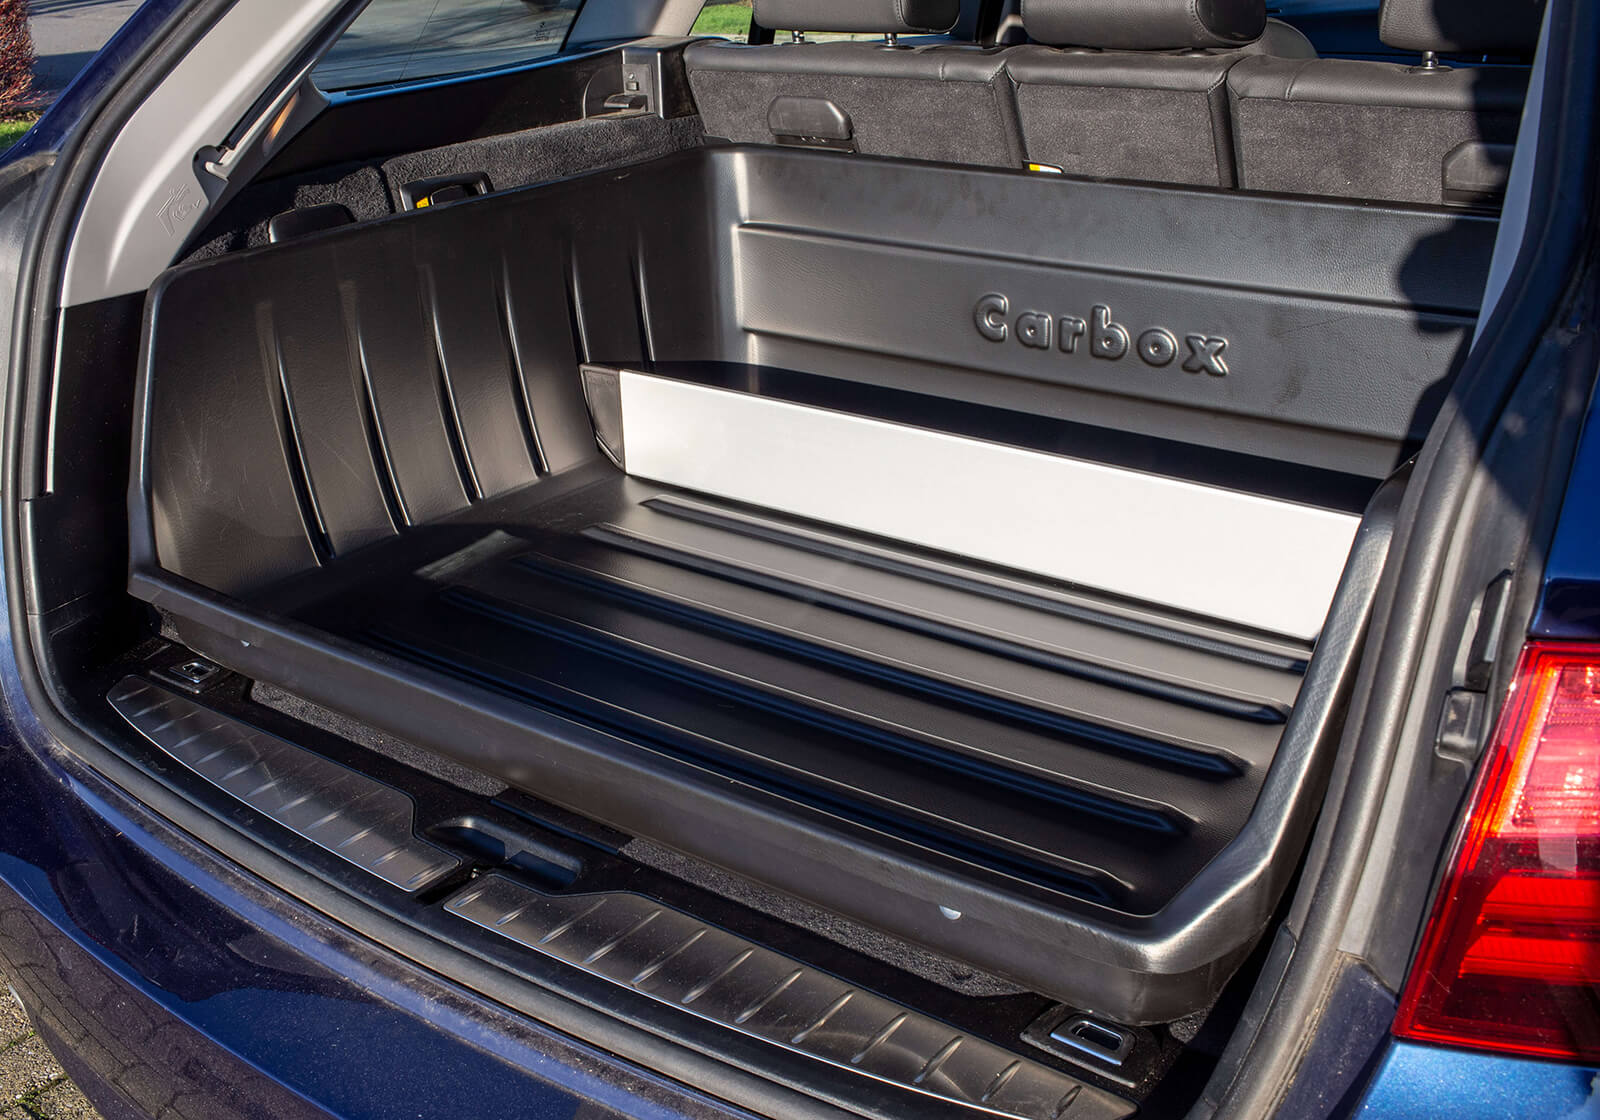 https://www.roofbox.co.uk/car-boot-liners-mats/images/carbox_yoursize_13.jpg